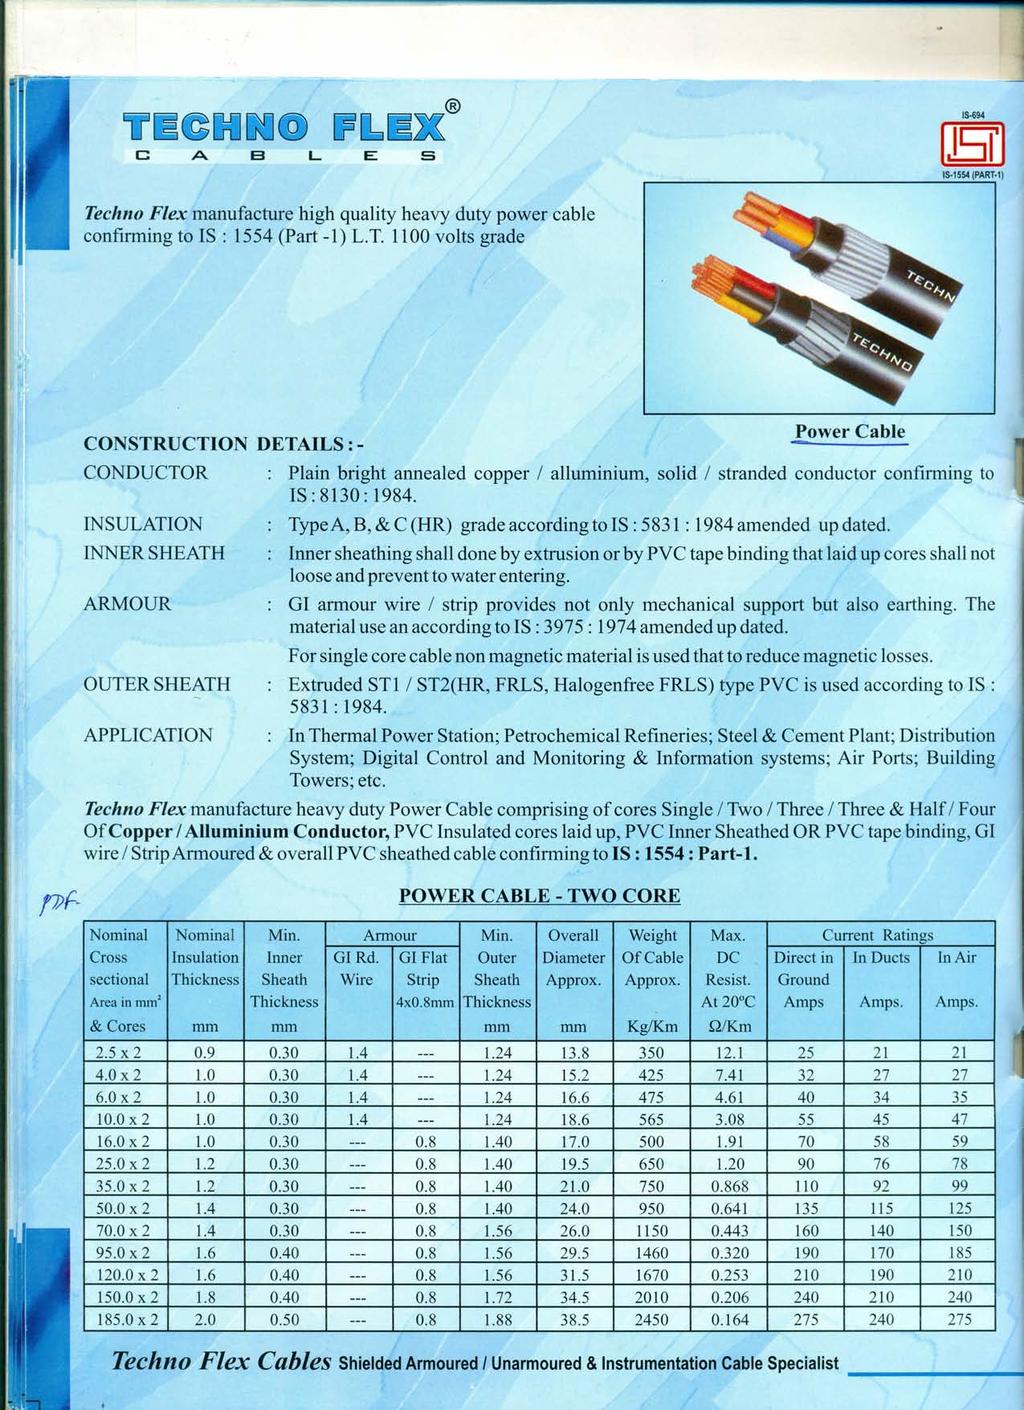 c A B L E 5 [B) Techno Flex manufacture high quality heavy duty power cable confirming to IS: 1554 (Part -1) L.T. 1100 volts grade CONSTRUCTION DETAILS:- Power Cable CONDUCTOR Plain bright annealed copper!